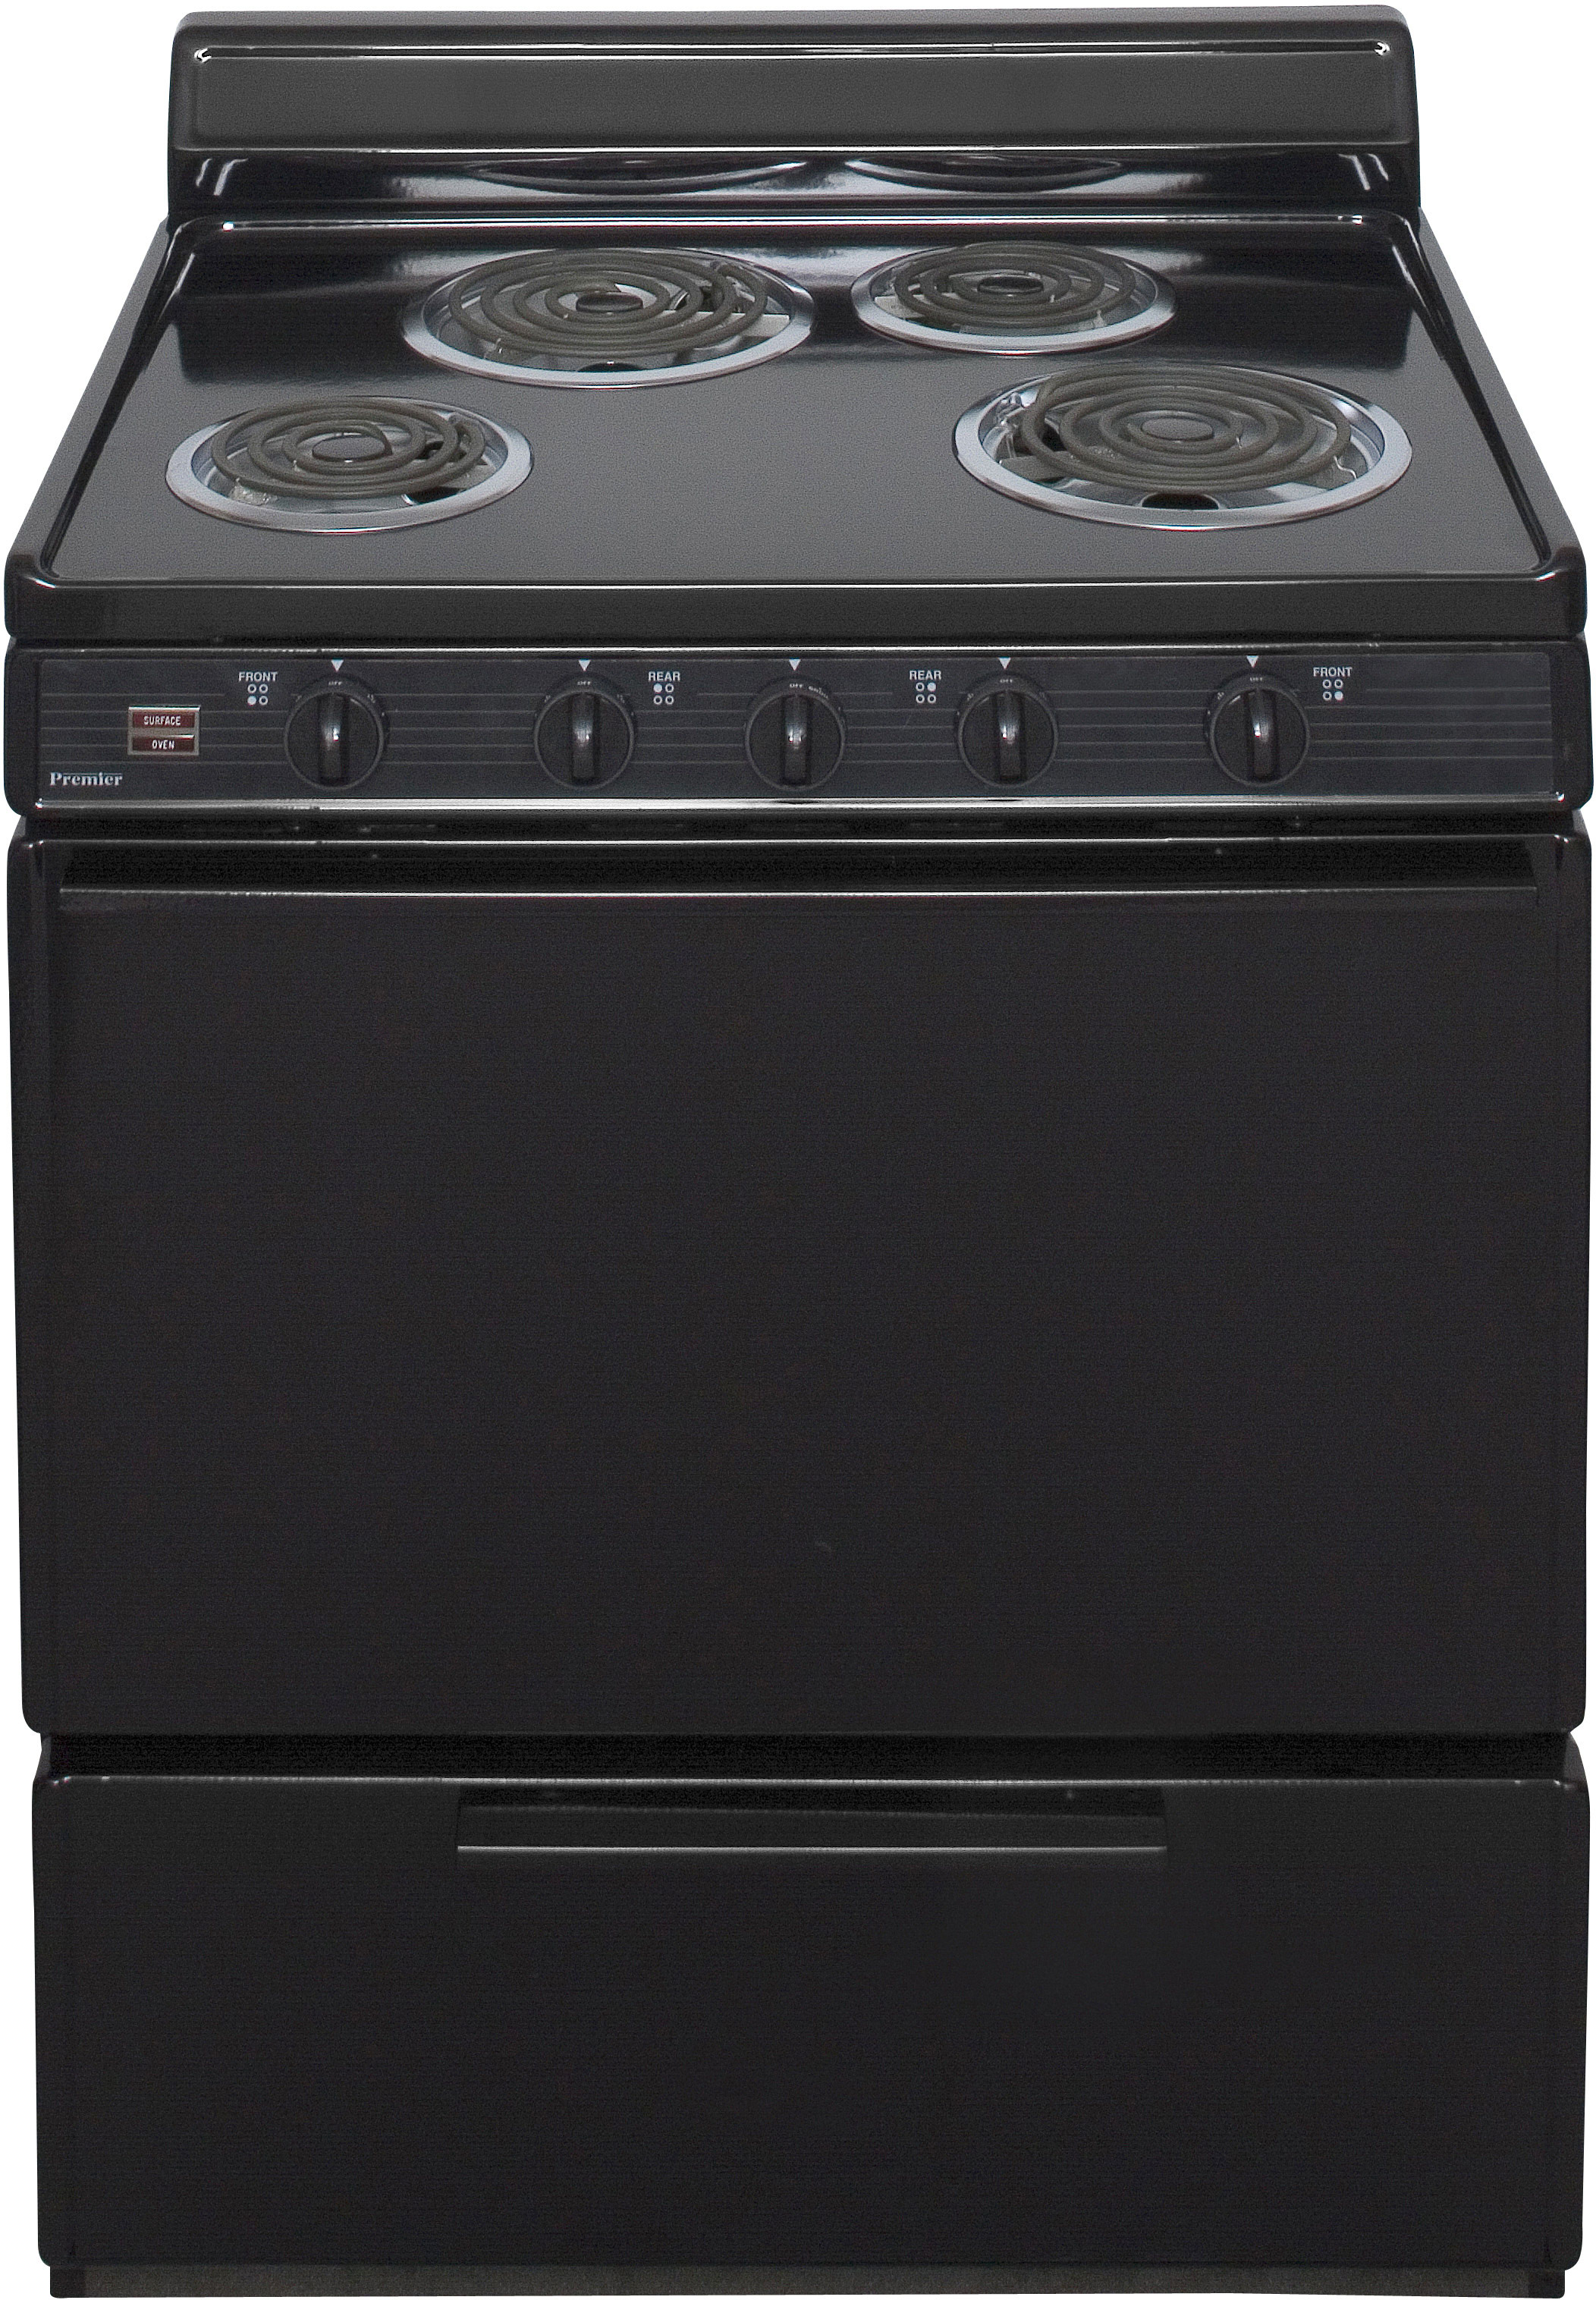 premier-edk100bp-30-inch-freestanding-electric-range-with-4-coil